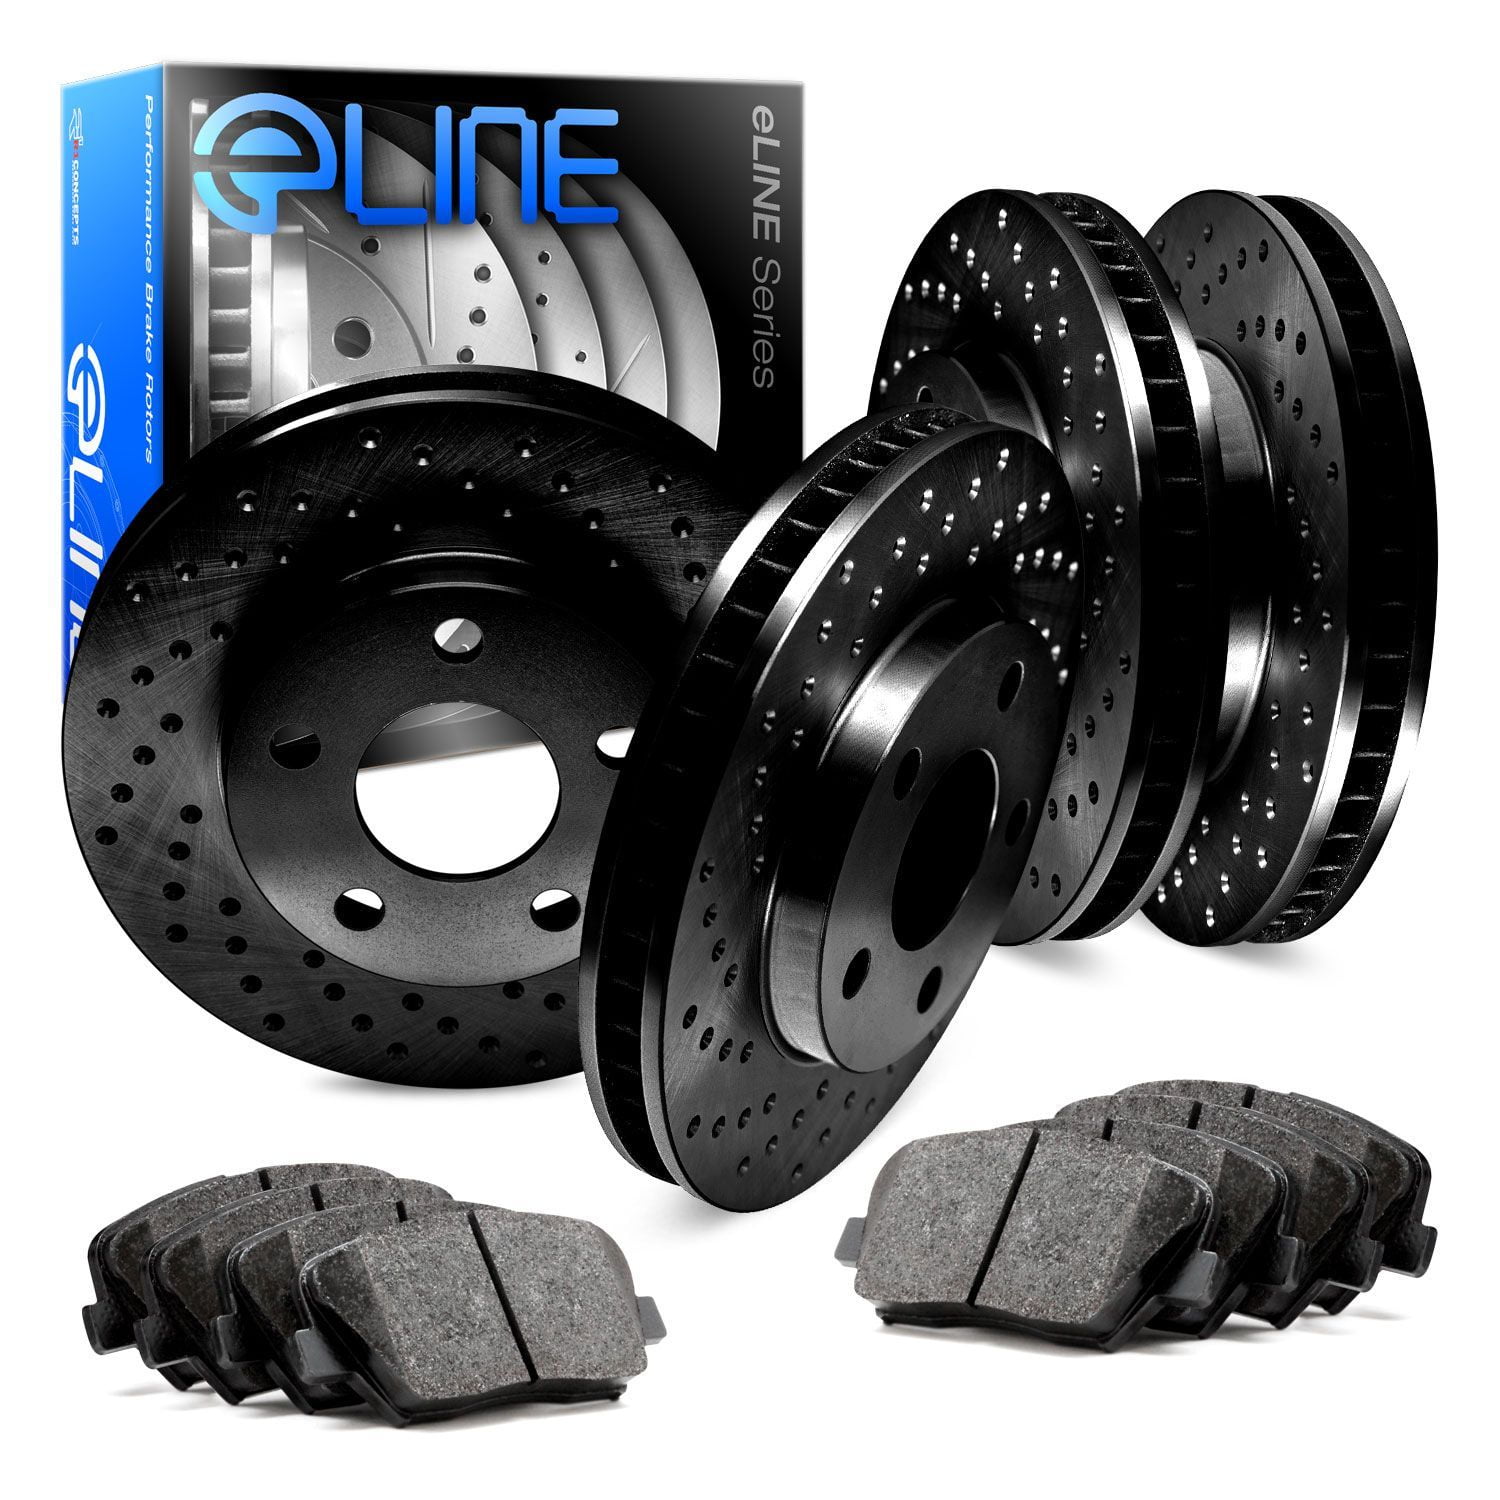 Frontier Front Rear Black Drilled Brake Rotors+Ceramic Pads Fit Nissan Xterra